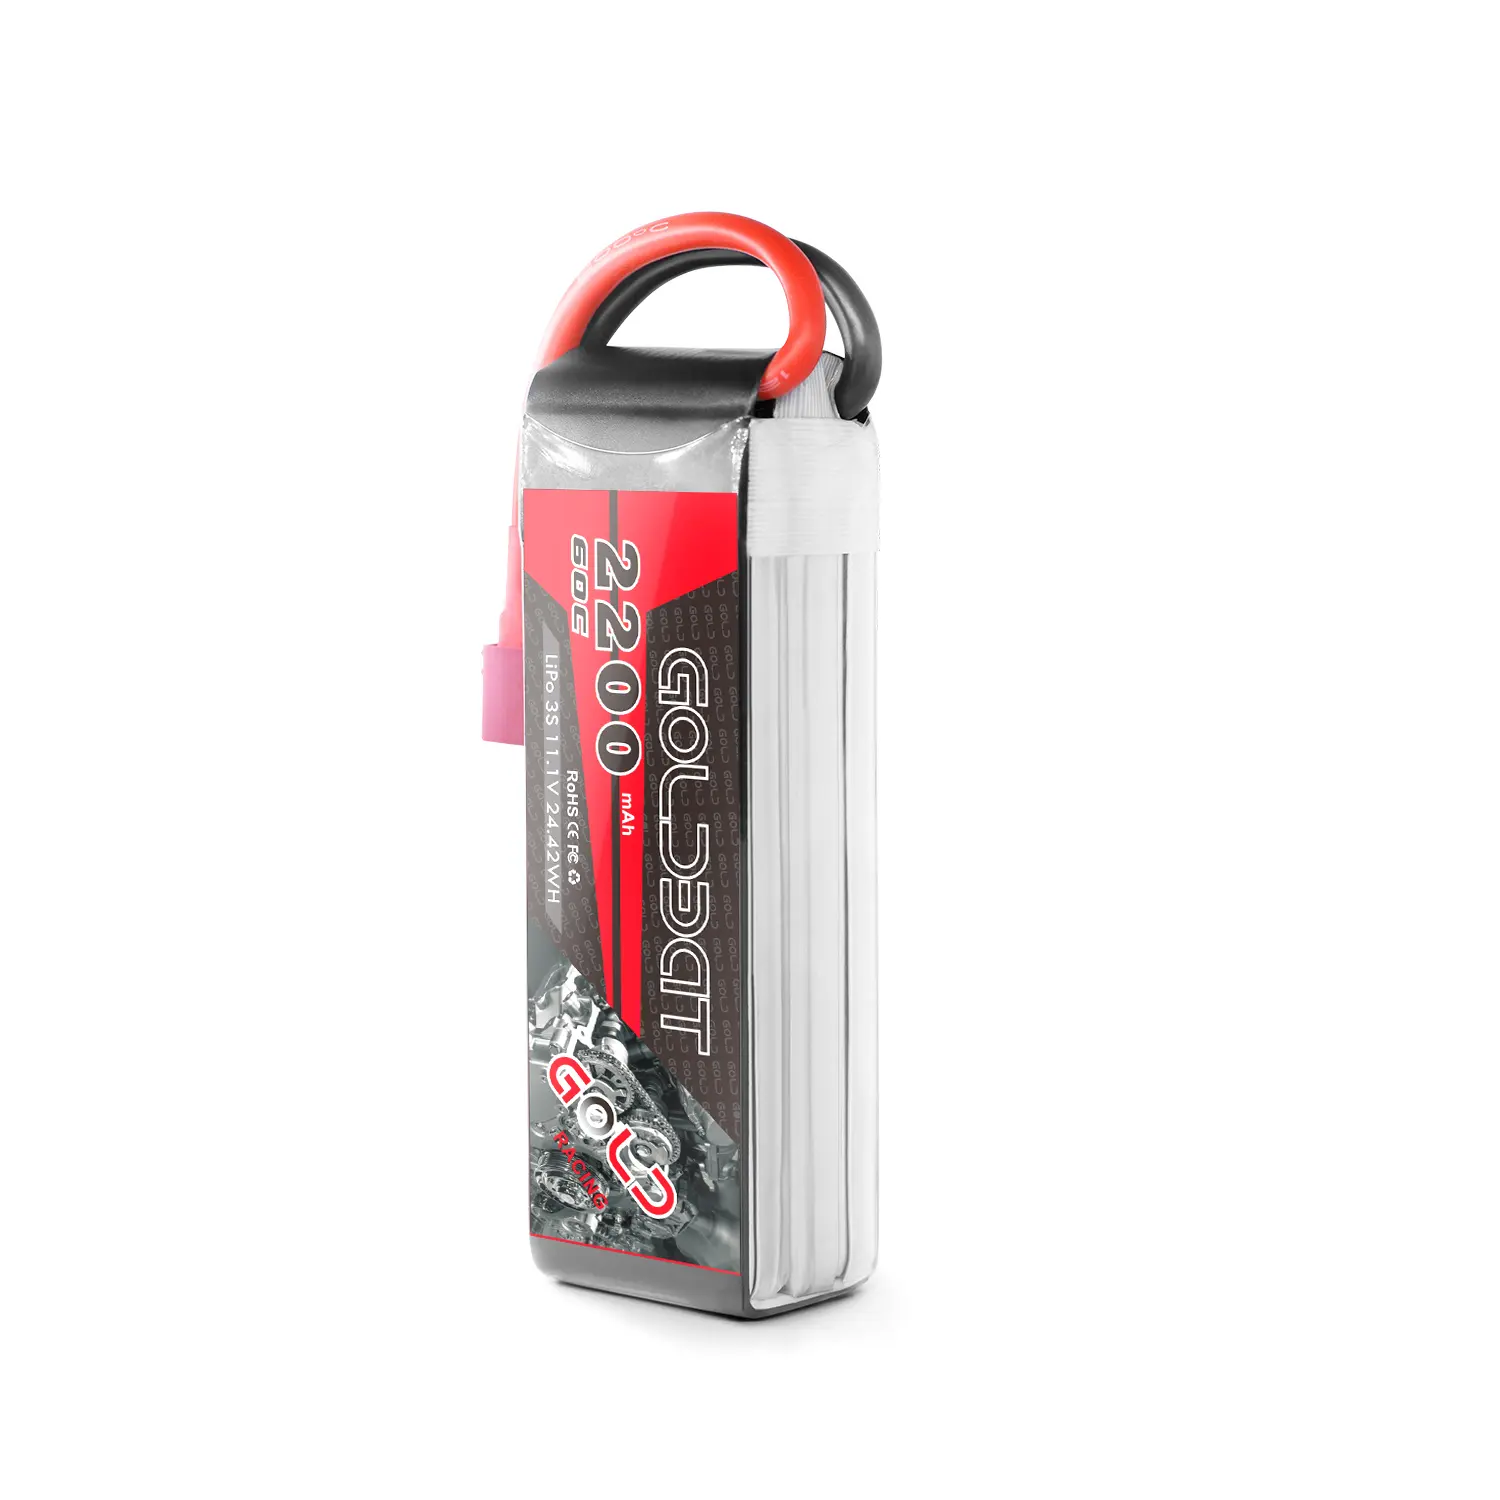 High C-Rating Lipo Battery Best Seller 11.1V 60C 3S 2200mAh For RC Plane Drone Helicopter Battery